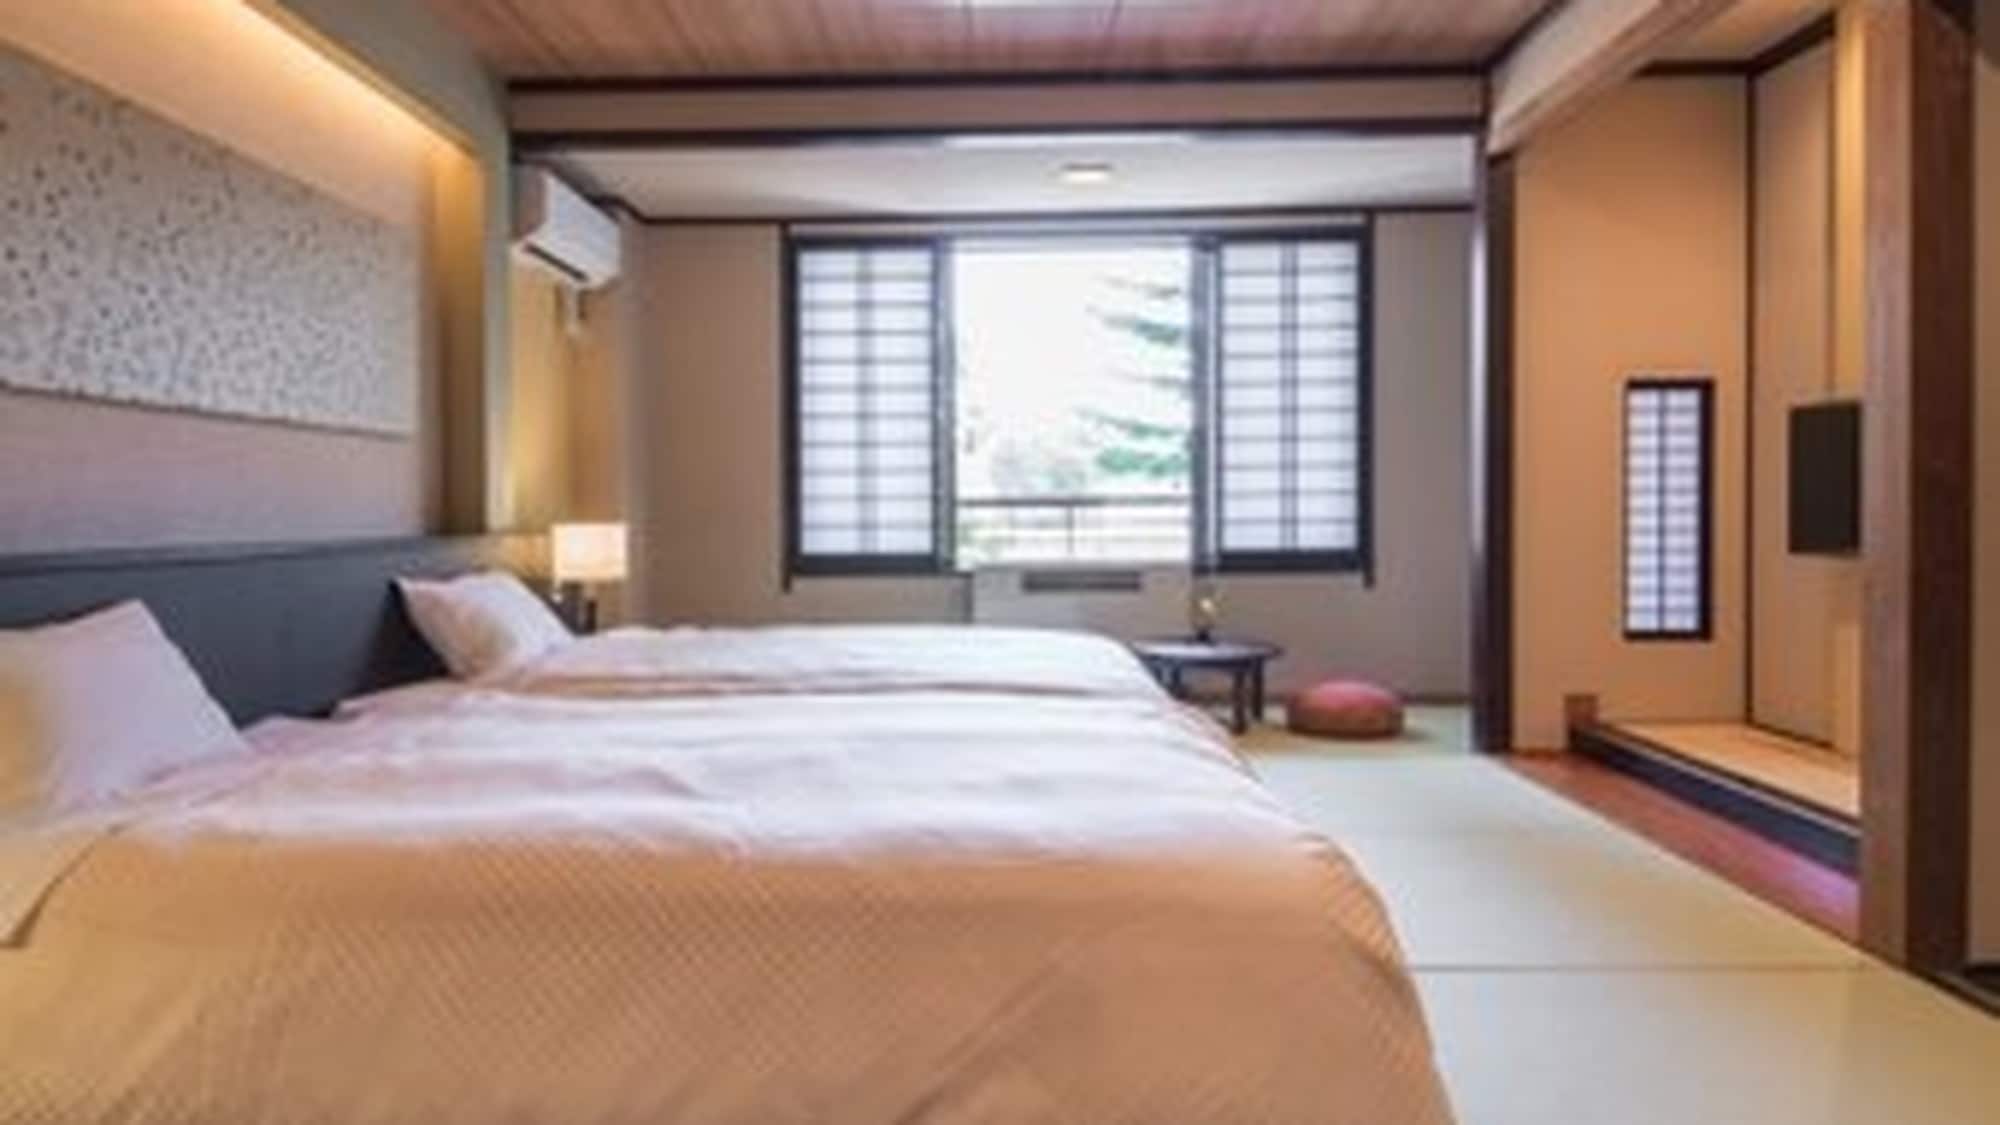 Renewal Japanese Modern << 2F Non-Smoking Twin Room >> Simmons Bed